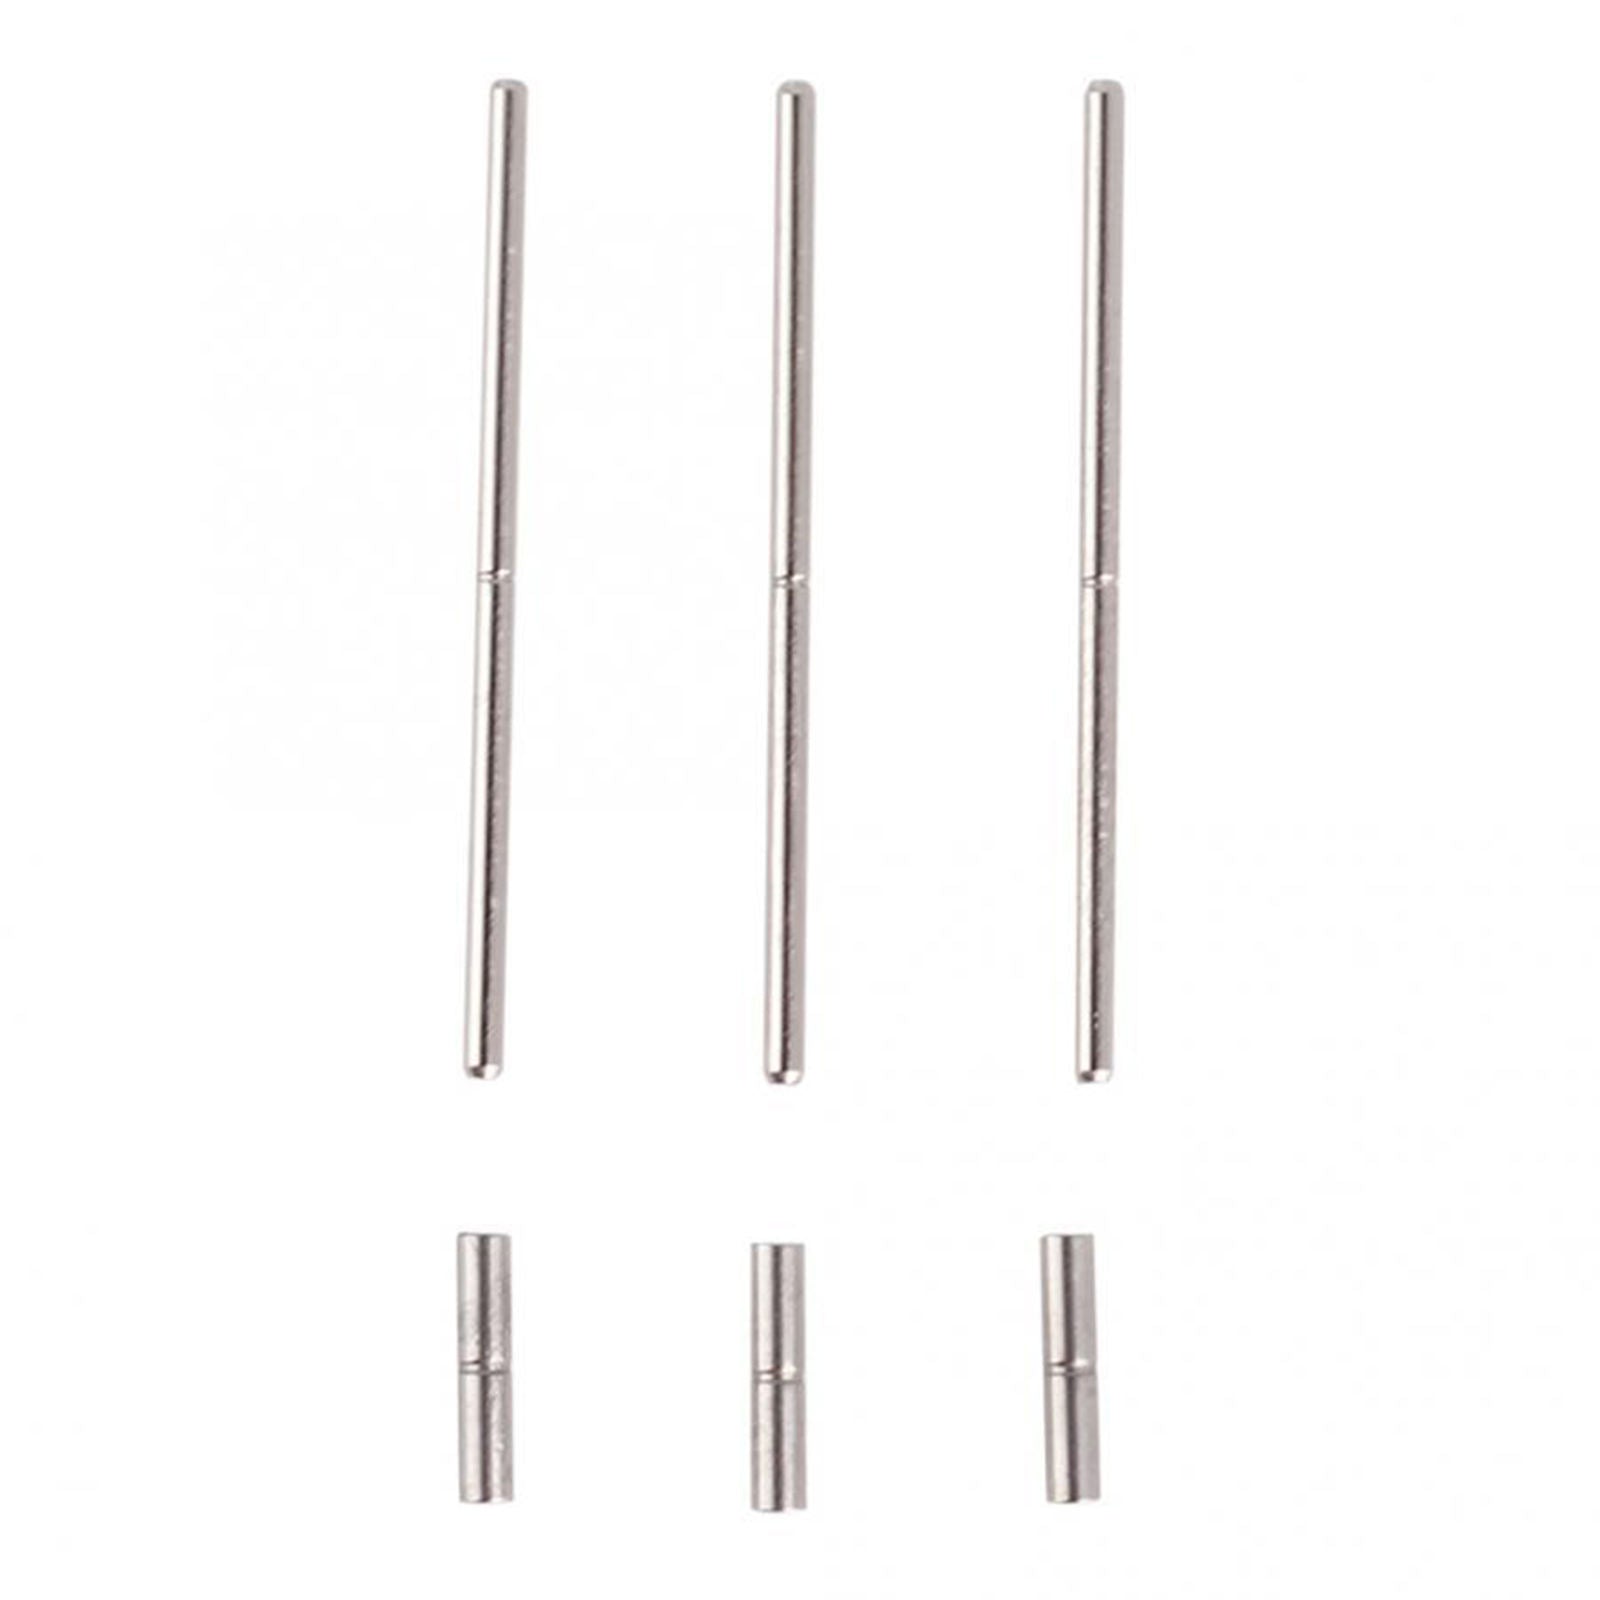 0.9mm 10mm~28mm Watchband Tube Bars Set Band Watch Accessories Repair Tool